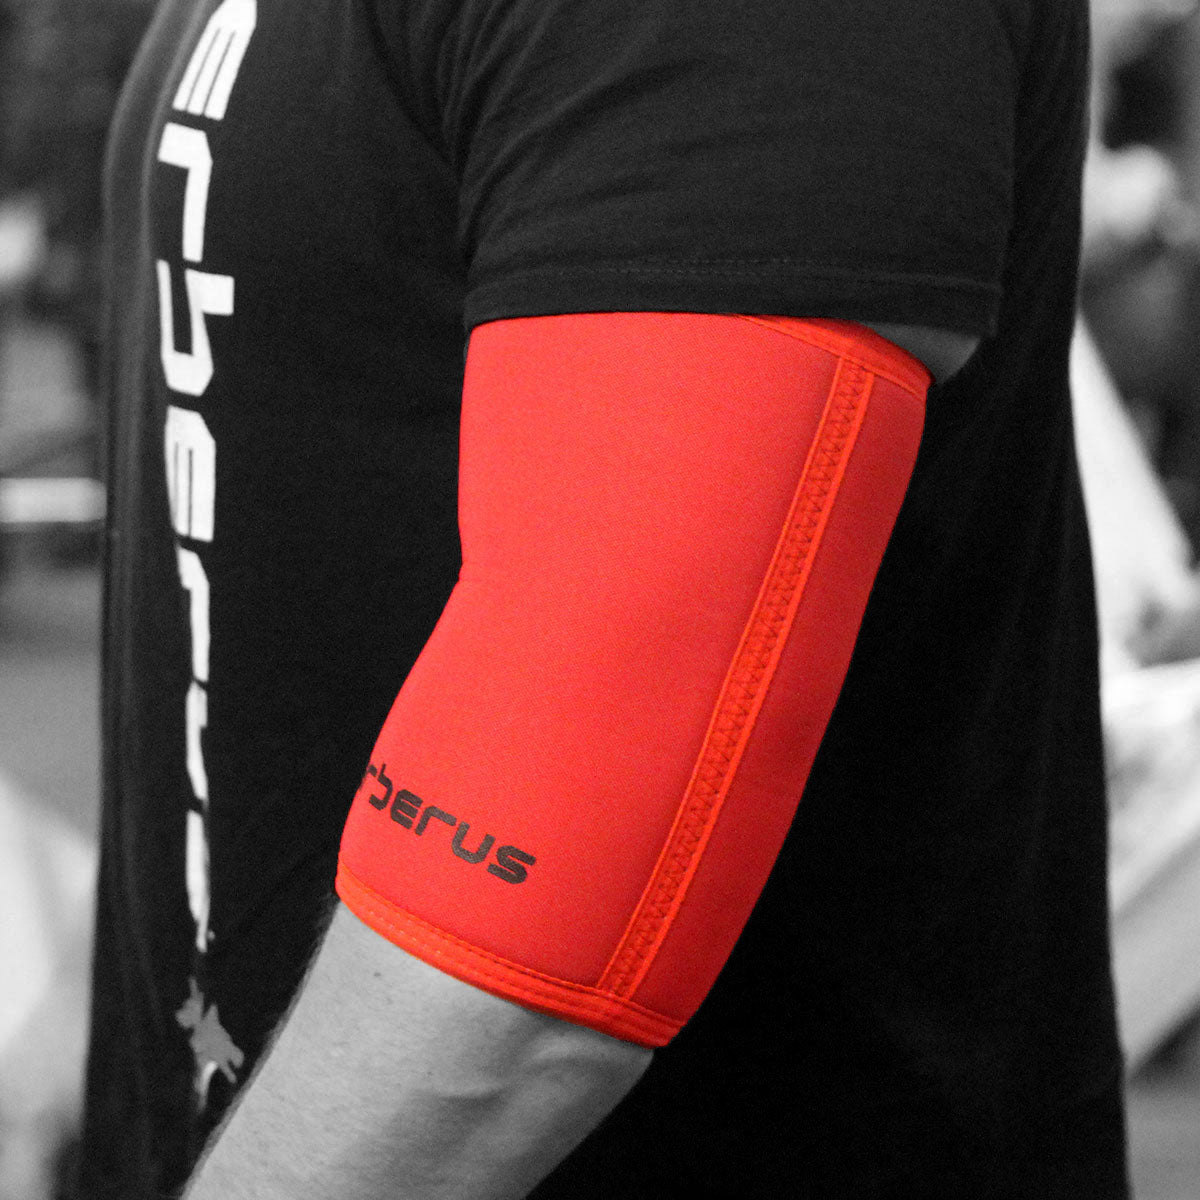 7mm EXTREME Elbow Sleeves